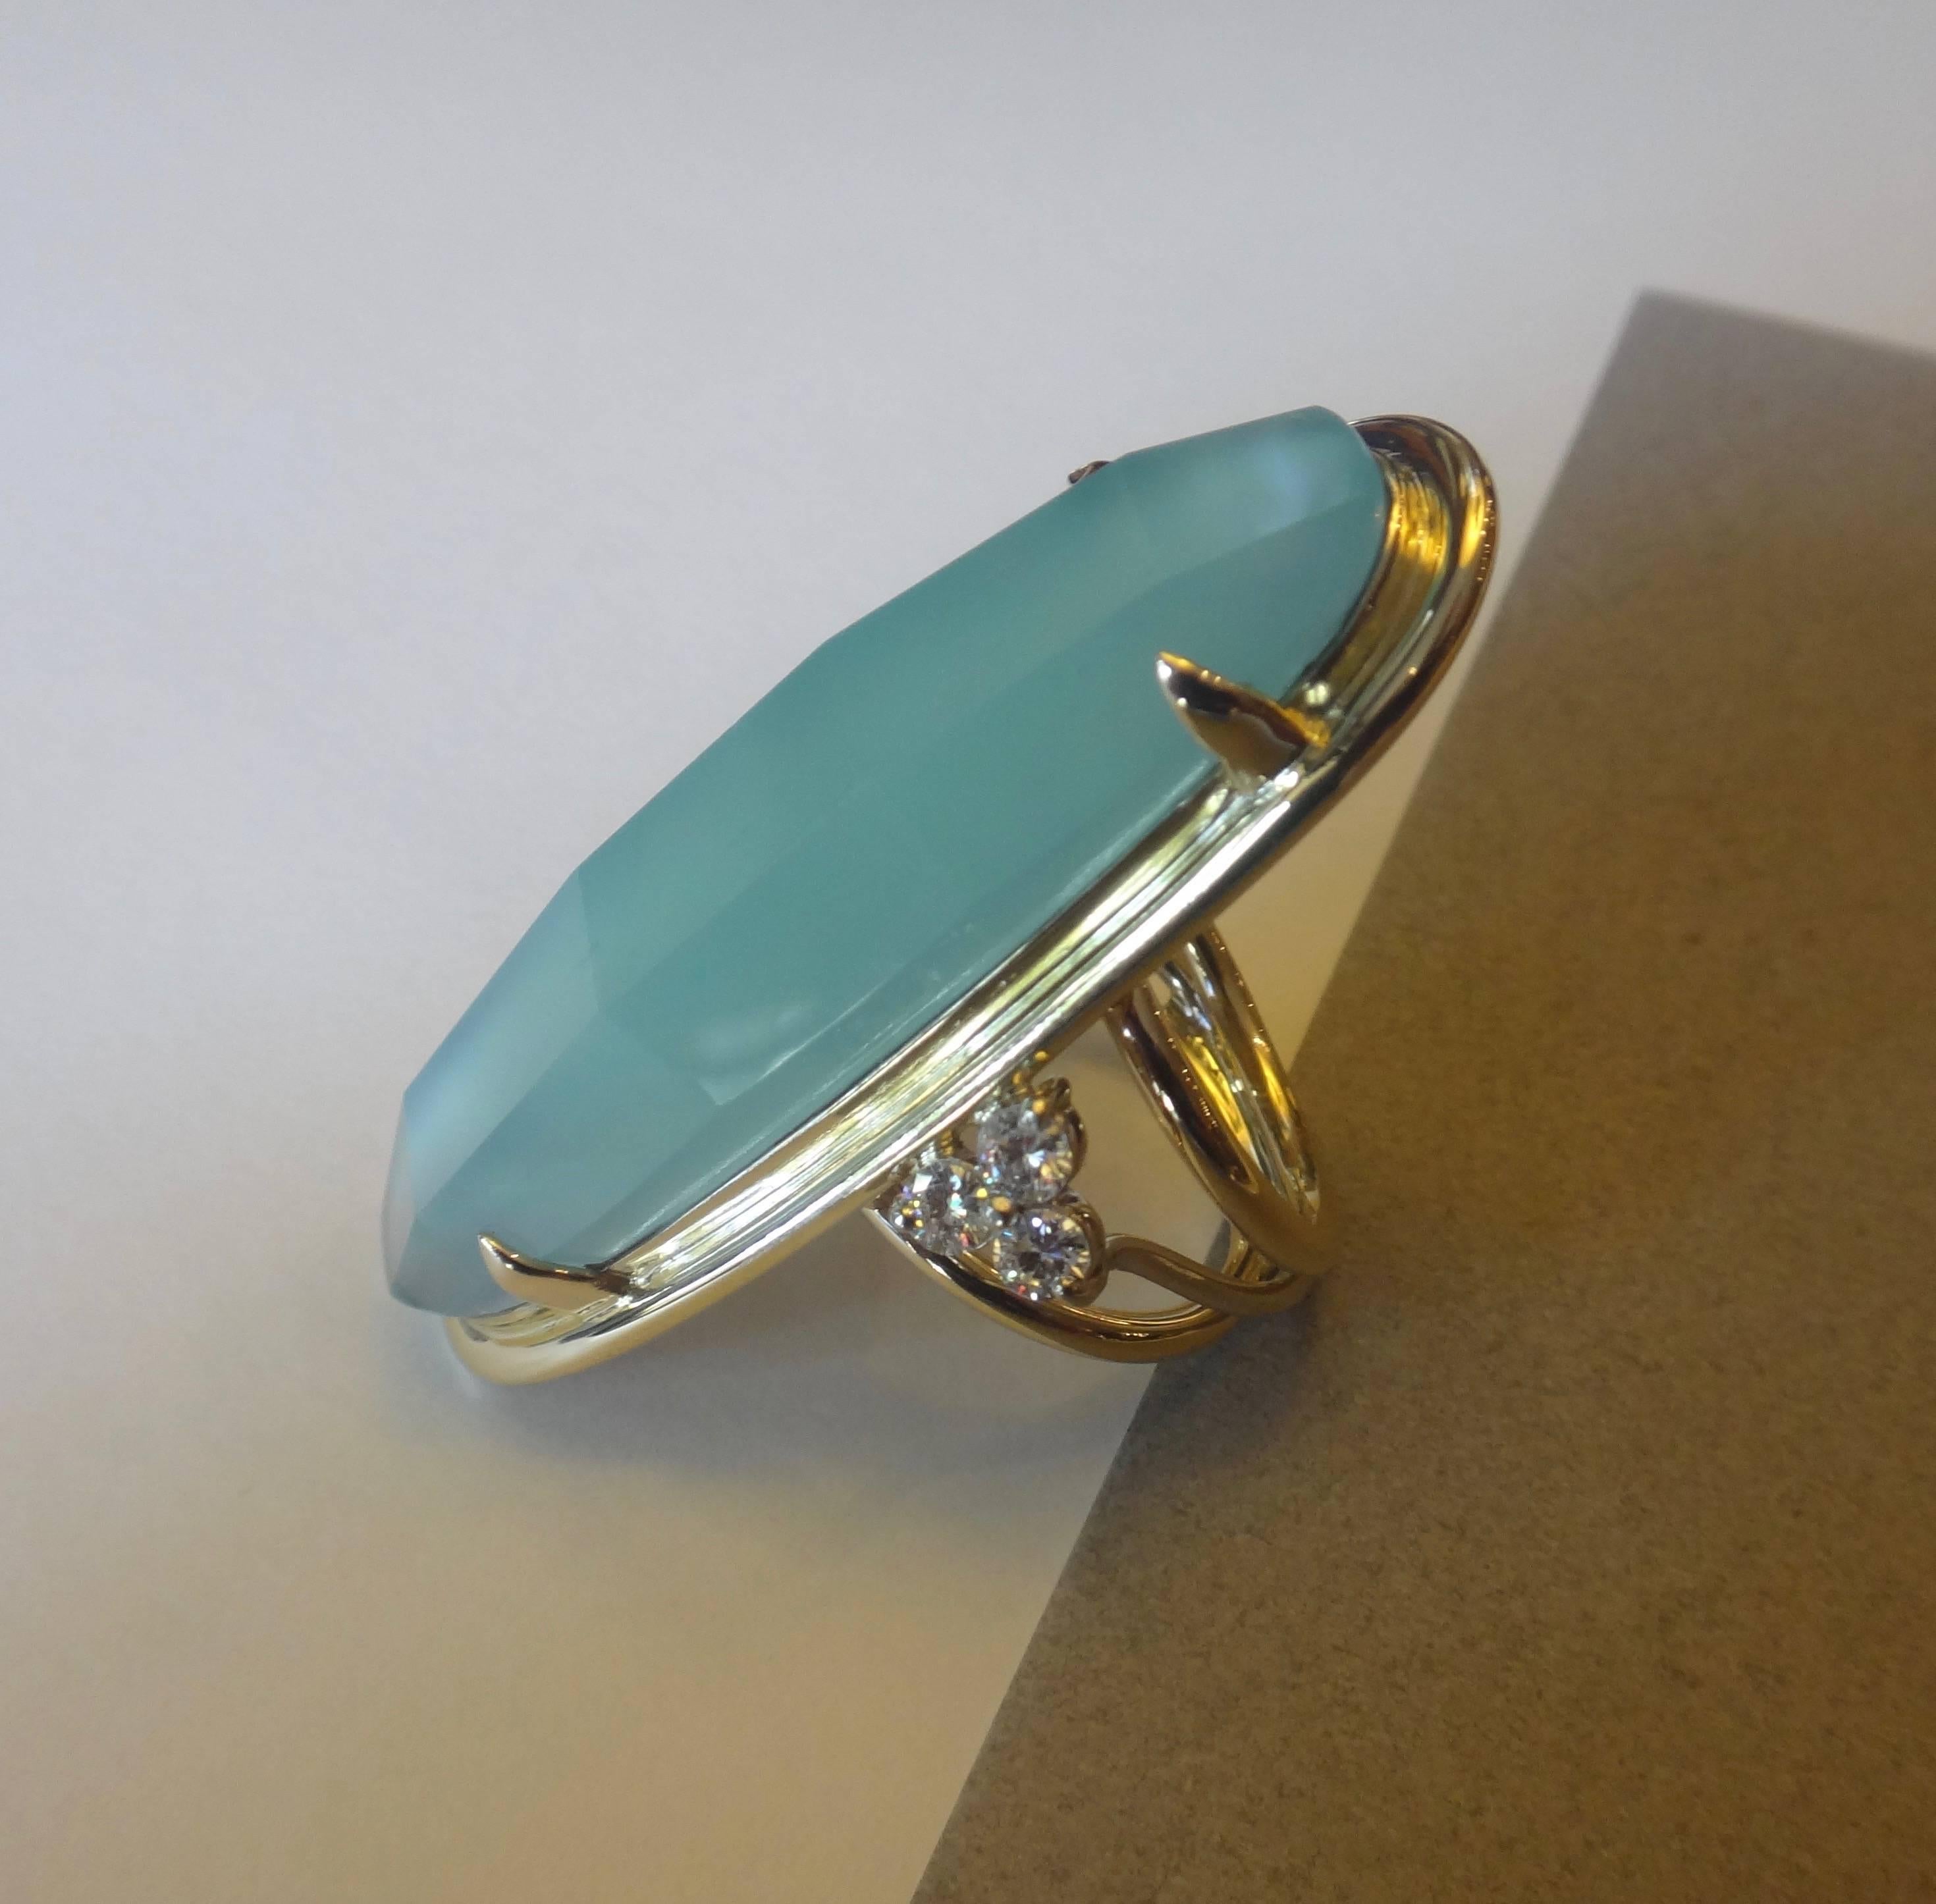 An exaggerated oval of a faceted and pearlescent aquamarine is complimented with diamonds in this most unusual cocktail ring.  The setting is hand made in 18k gold.  The ring is a size 7 and is easily adjusted.  